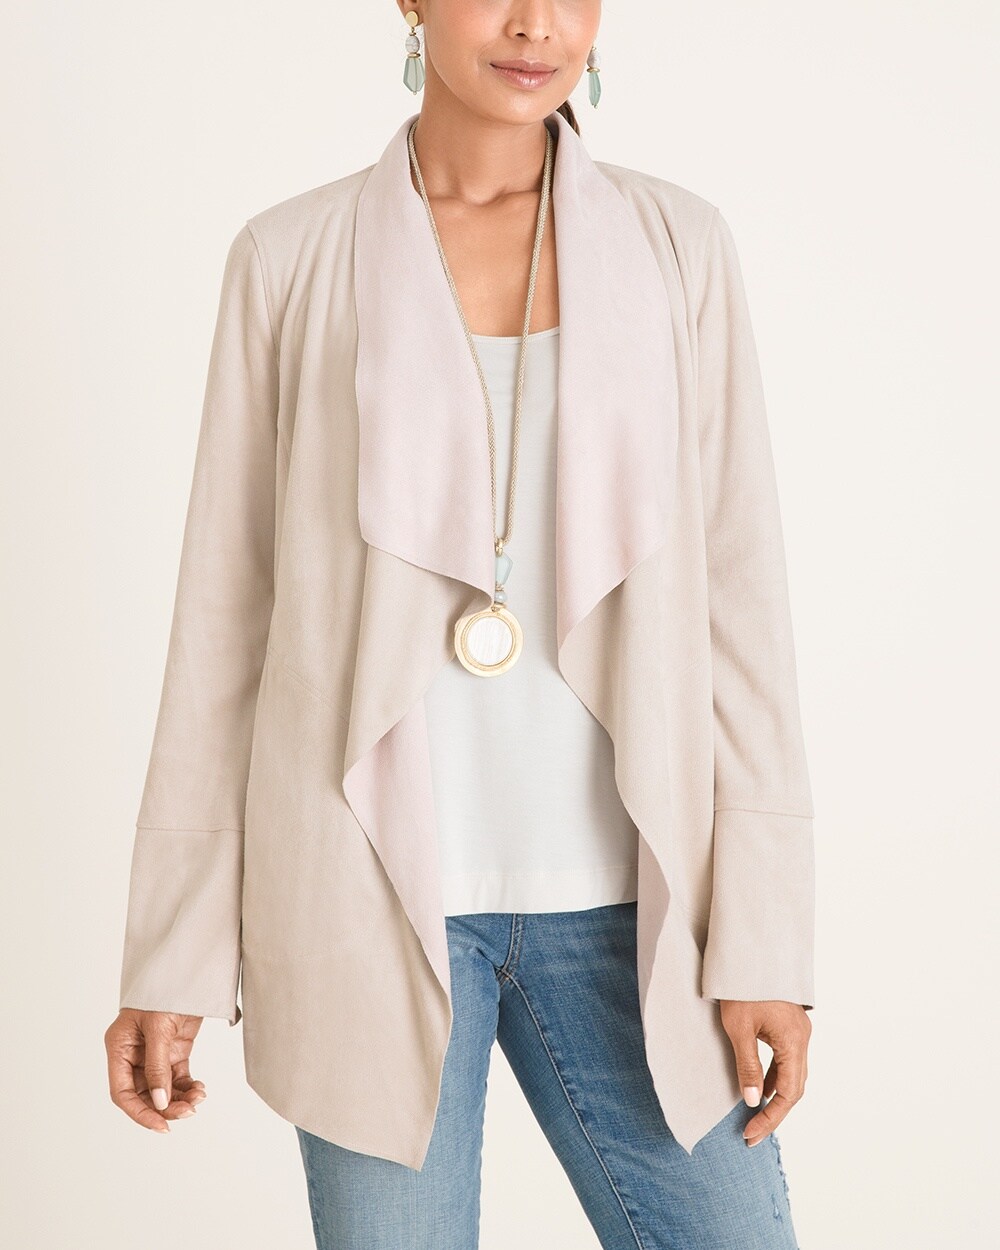 Travelers Collection Faux-Suede Jacket